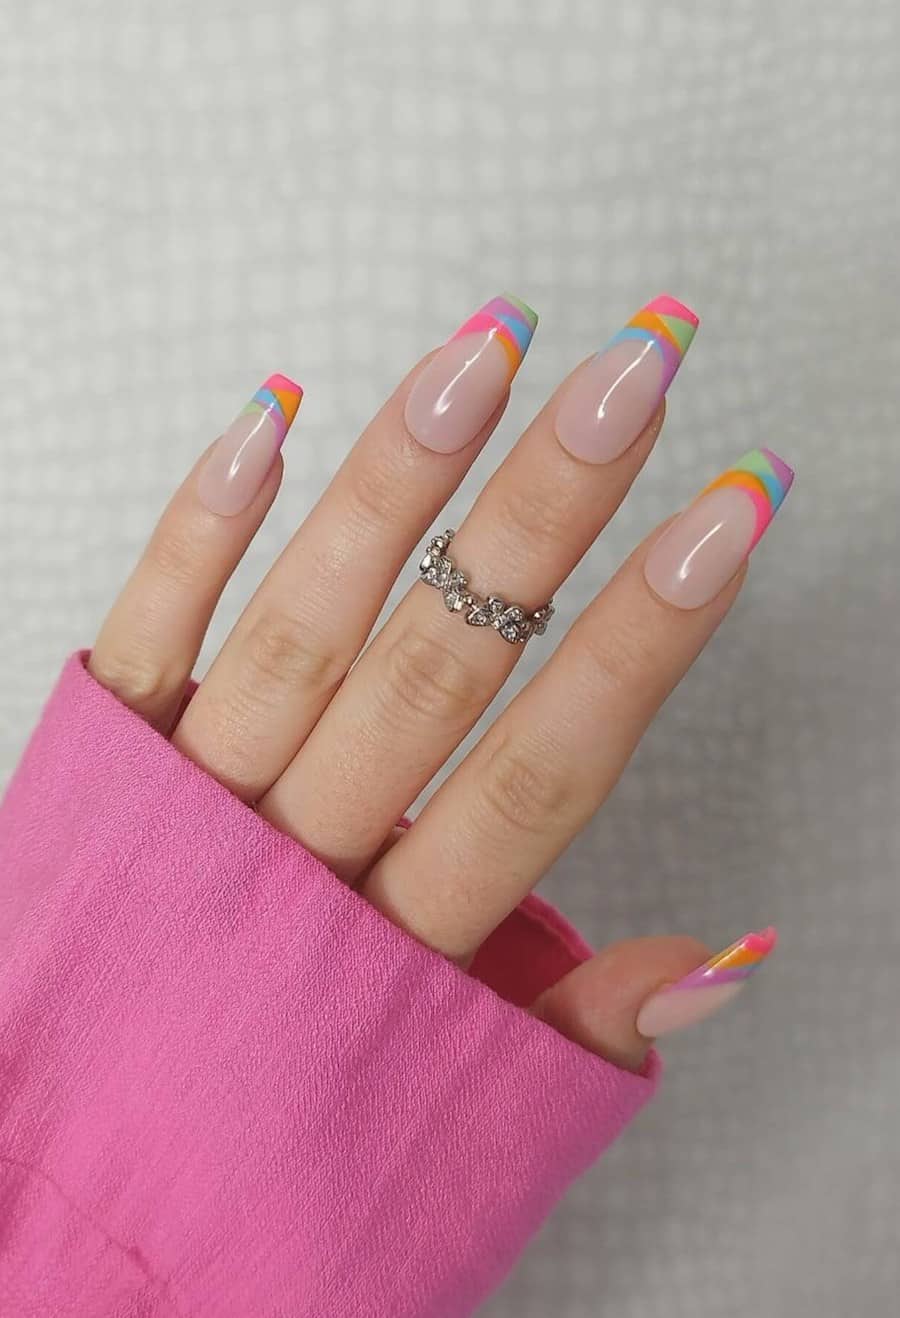 Long nude coffin nails with colorful French tips